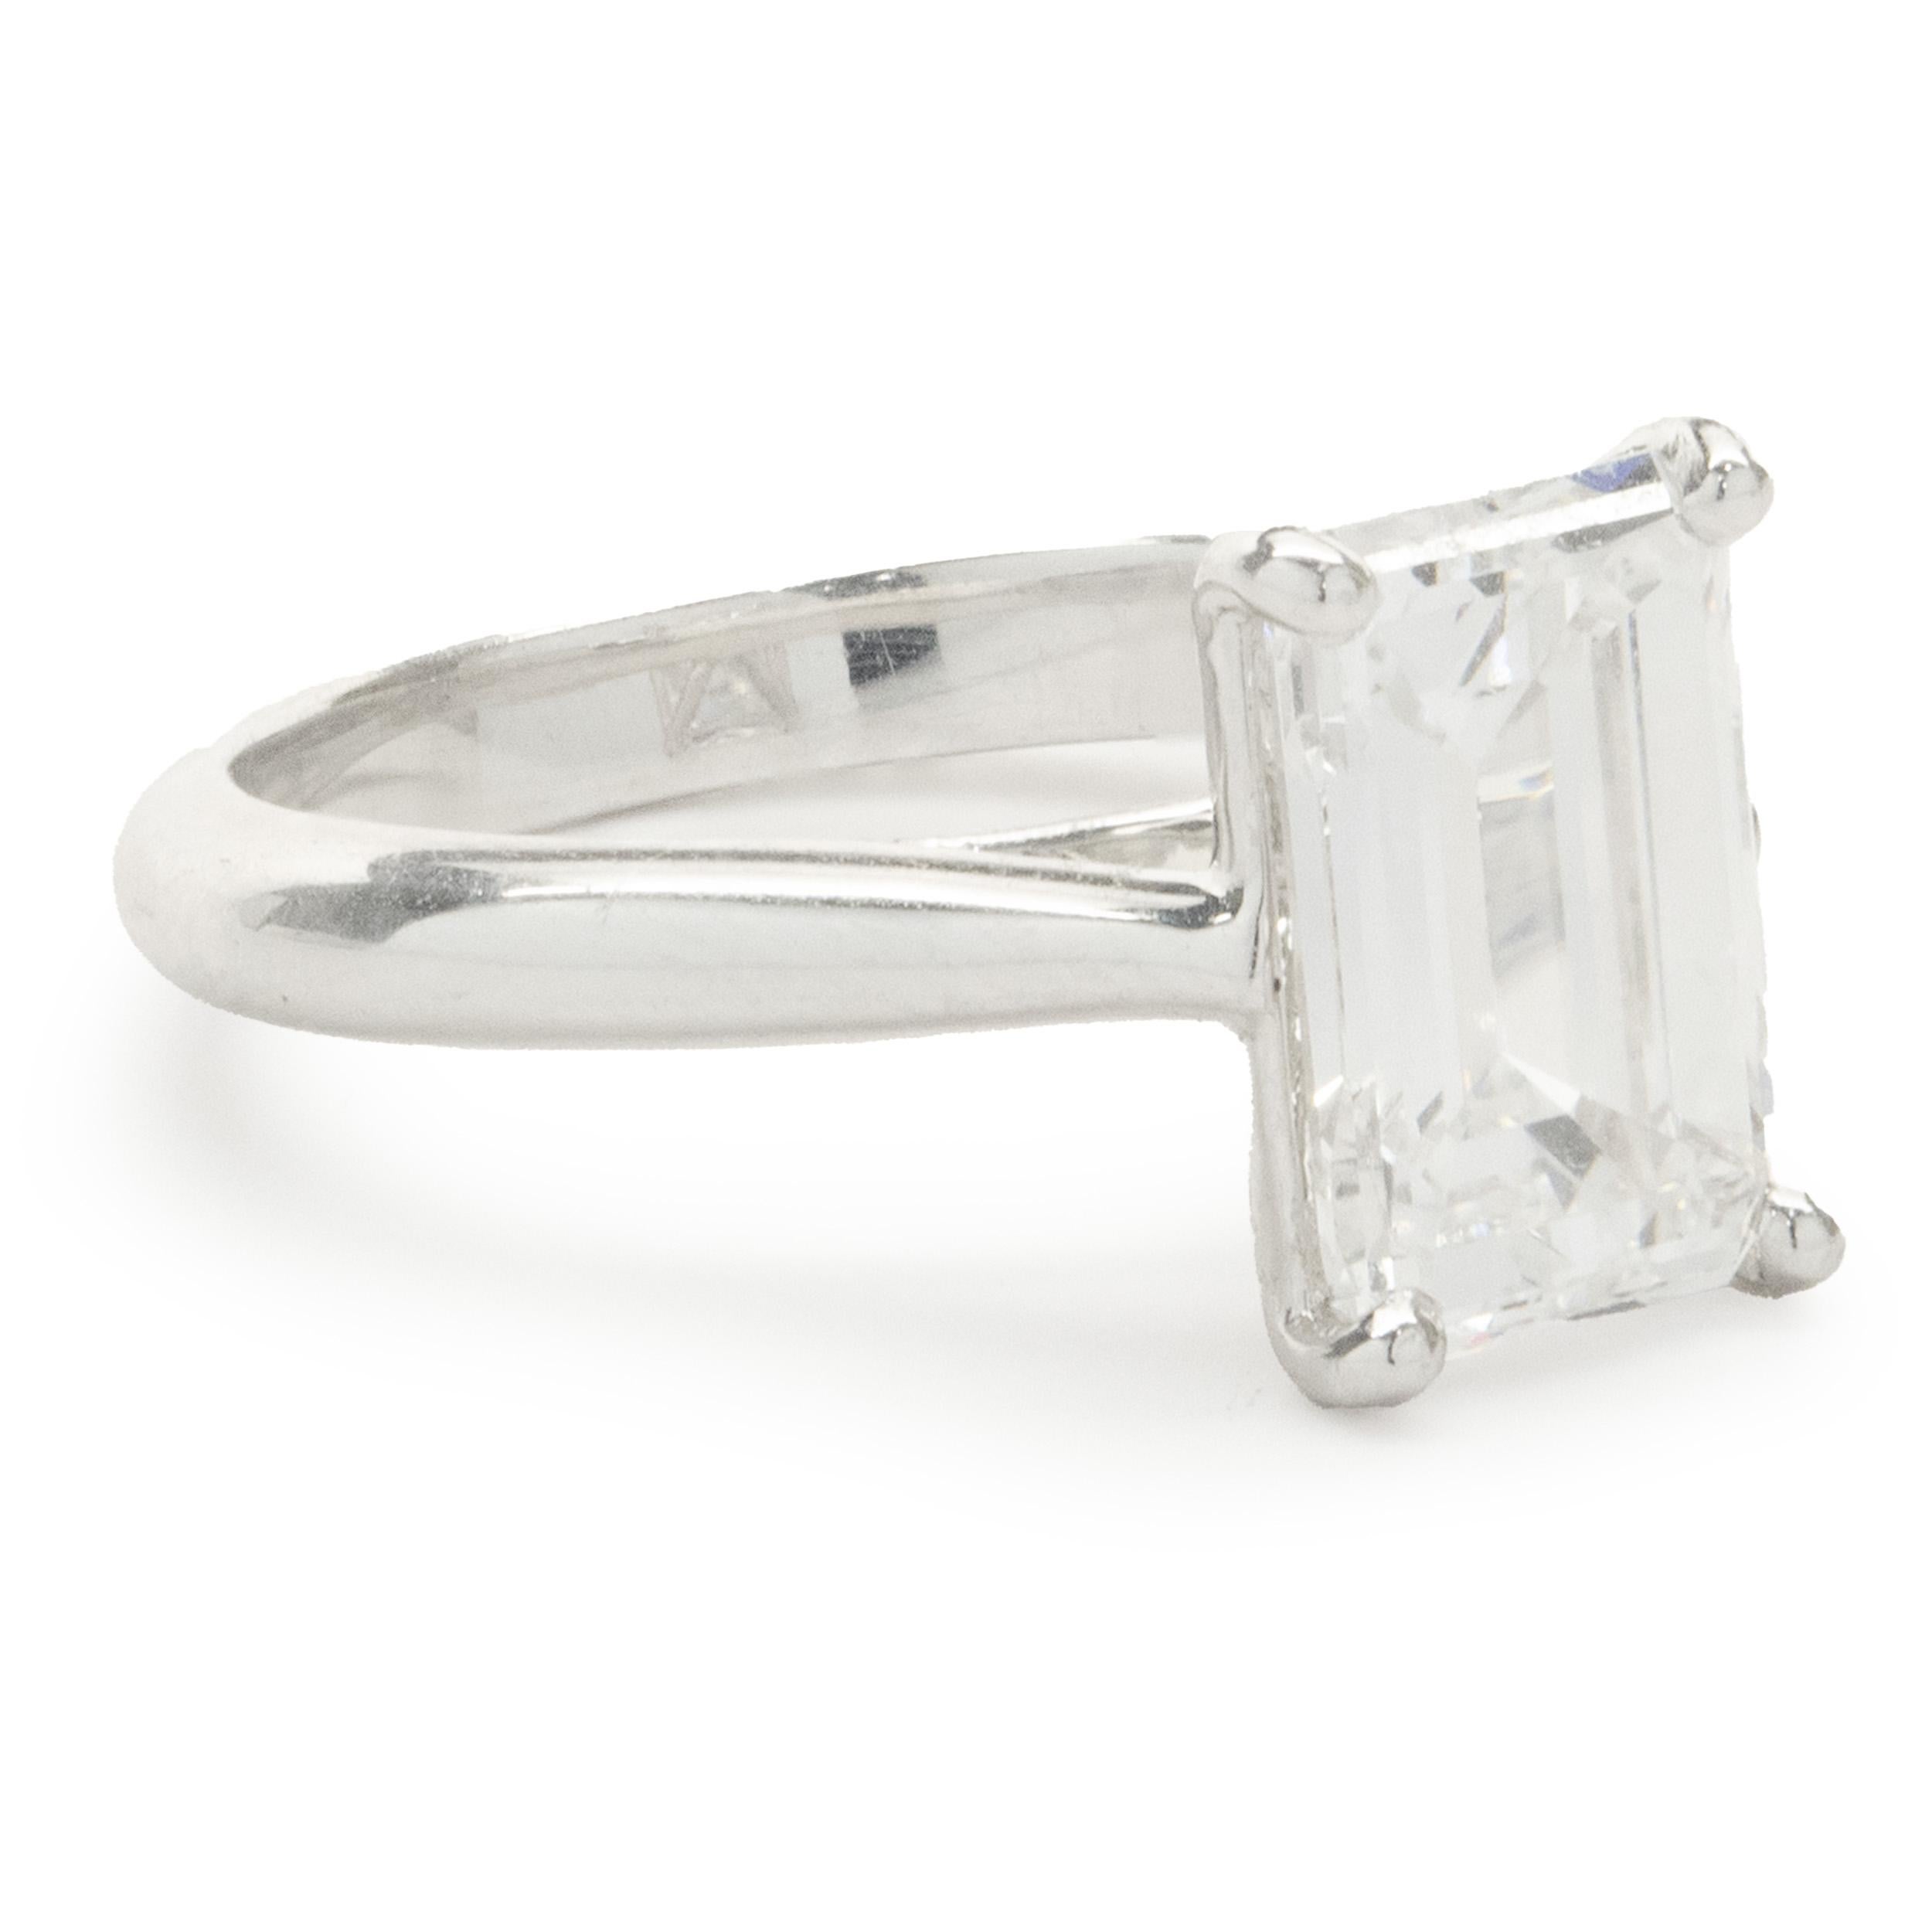 Designer: custom
Material: platinum
Diamond: 1 emerald cut = 2.50ct
Color: D
Clarity: IF
GIA: 1166921030
Ring Size: 4.75 (please allow up to 2 additional business days for sizing requests)
Dimensions: ring top measures 10.50mm wide
Weight: 4.98 grams